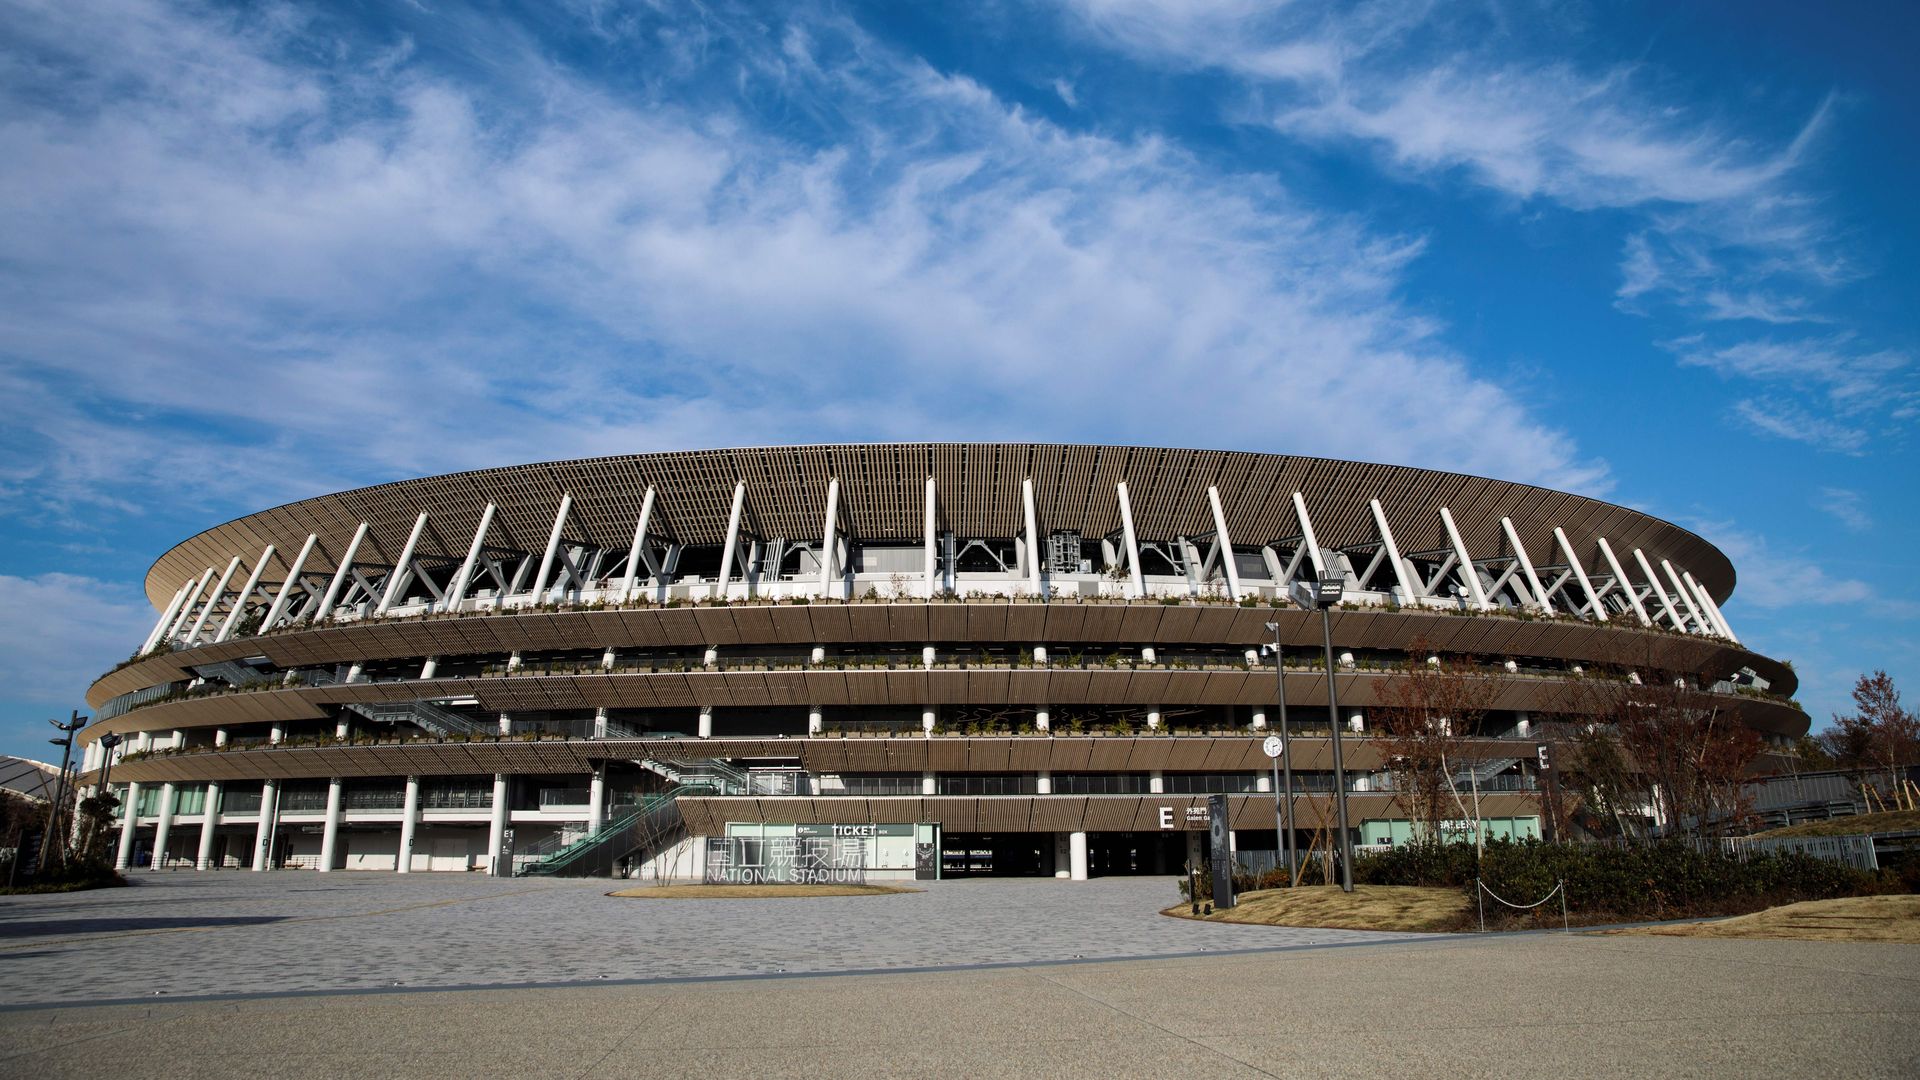 Tokyo's National Stadium for the 2020 Olympics